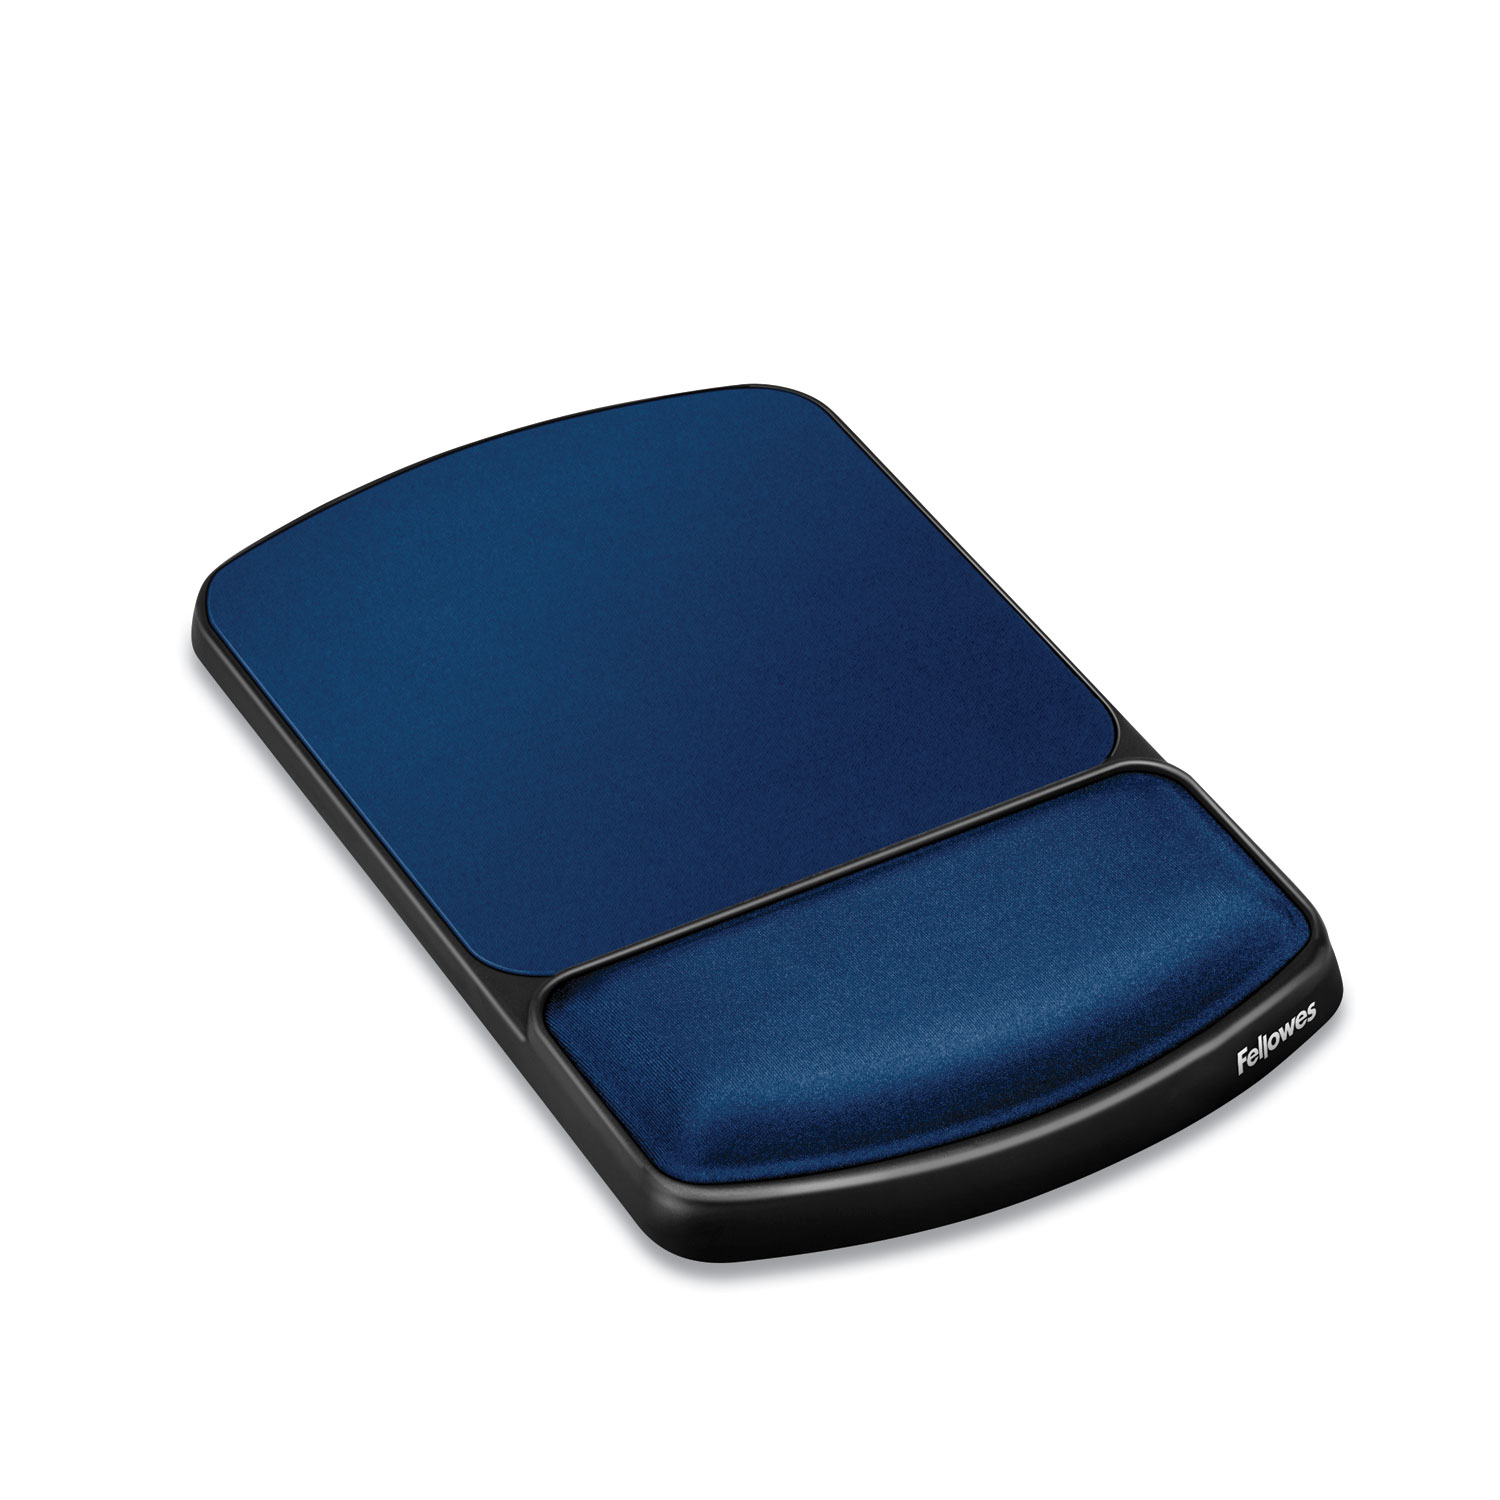 Mouse Pad with Gel Wrist Rest, 8.25 x 9.62, Blue - Zerbee